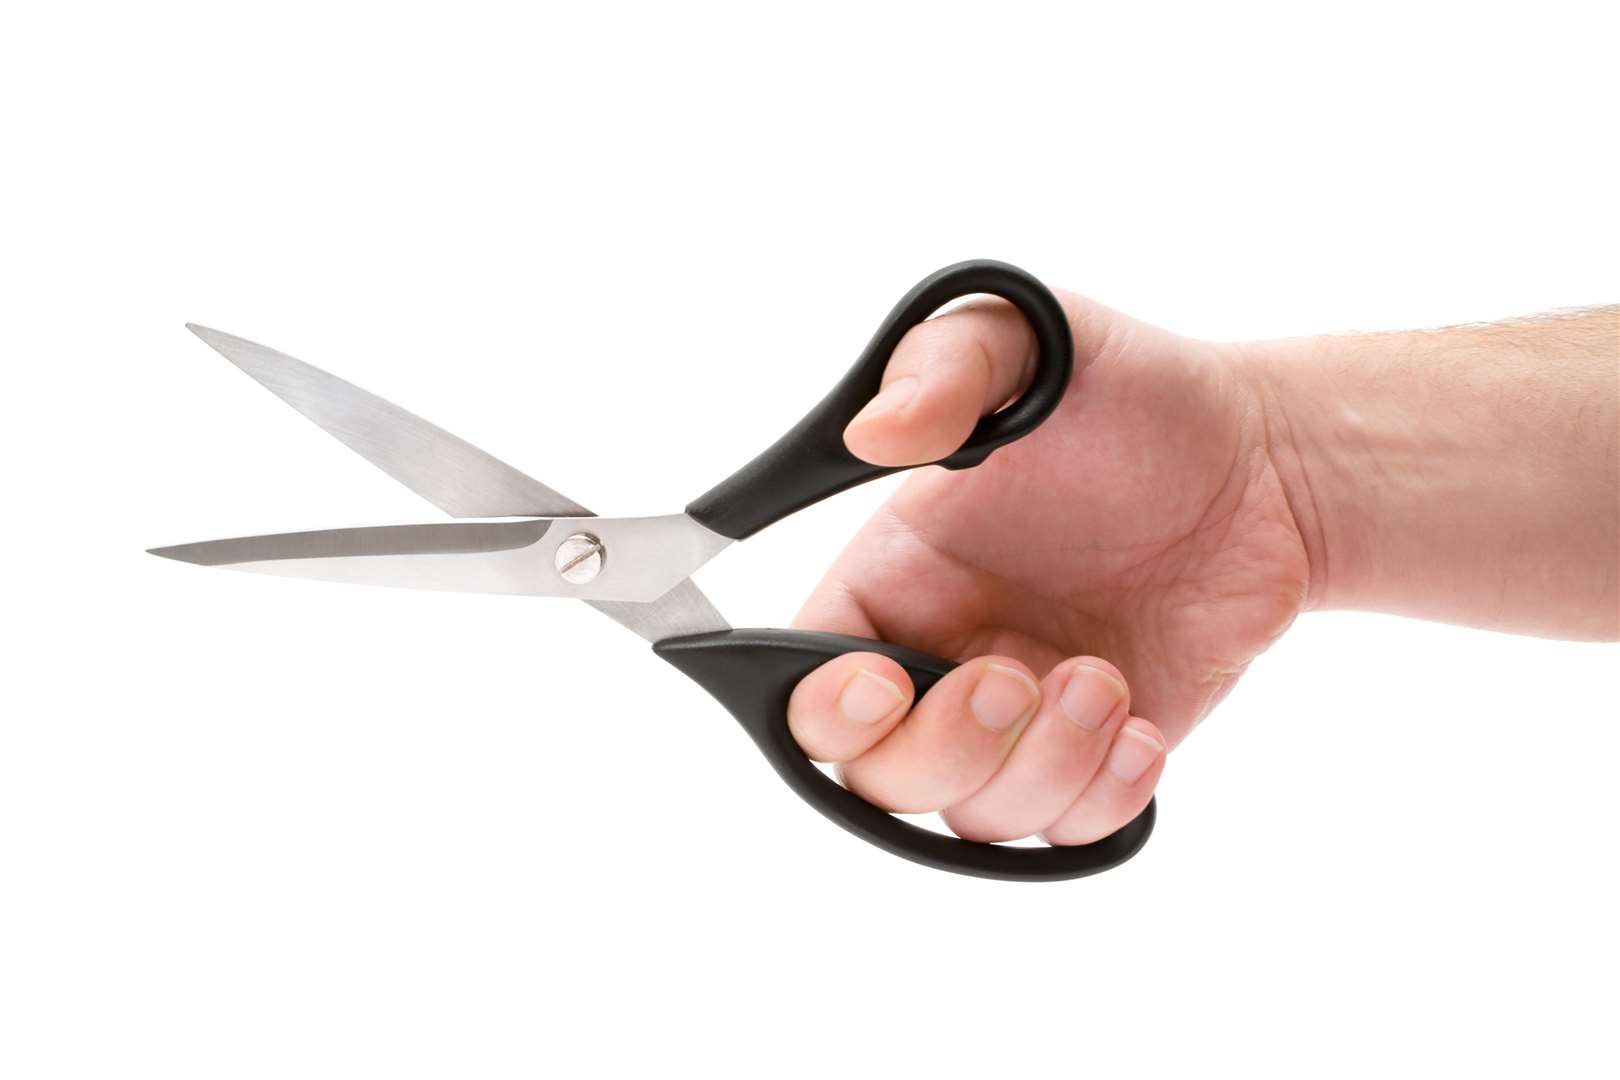 He was allegedly repeatedly stabbed with scissors. Stock image